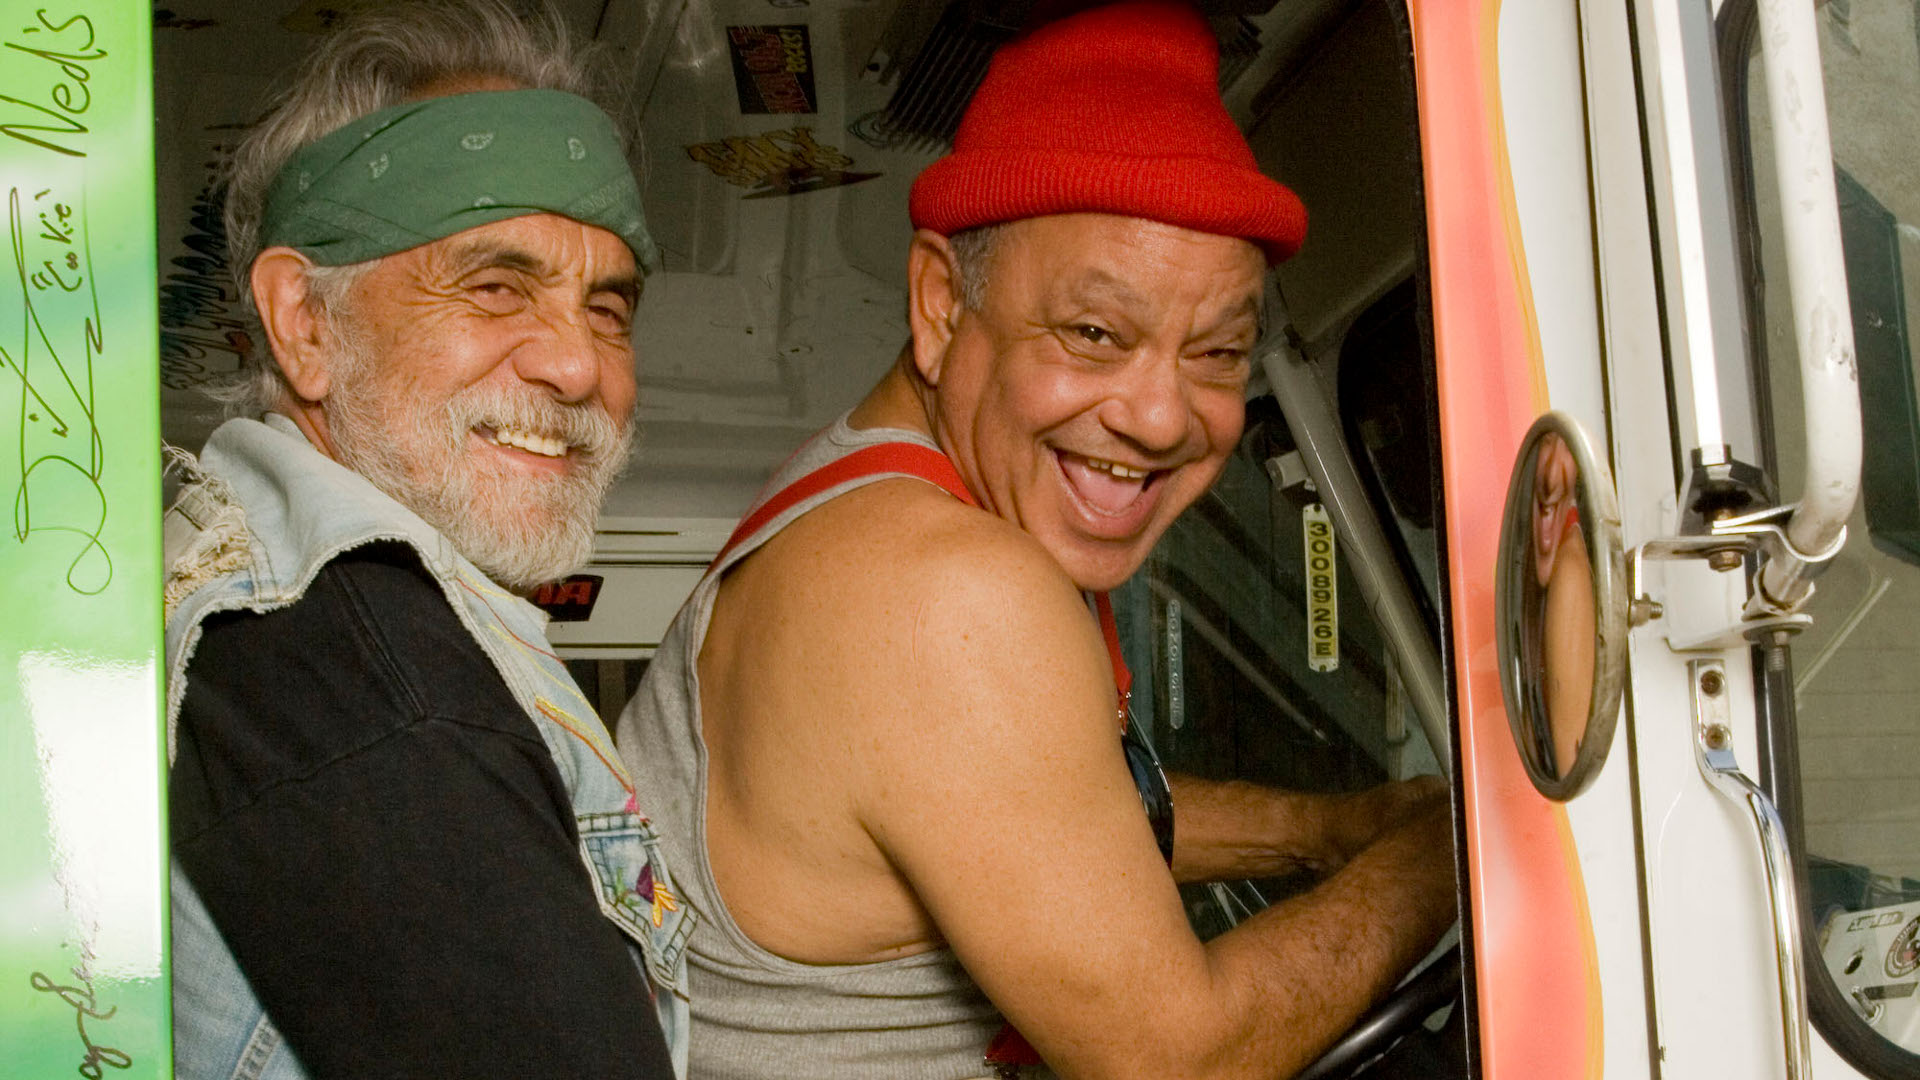 Cheech and chong live in a decrepit old house and drive their neighbour cra...